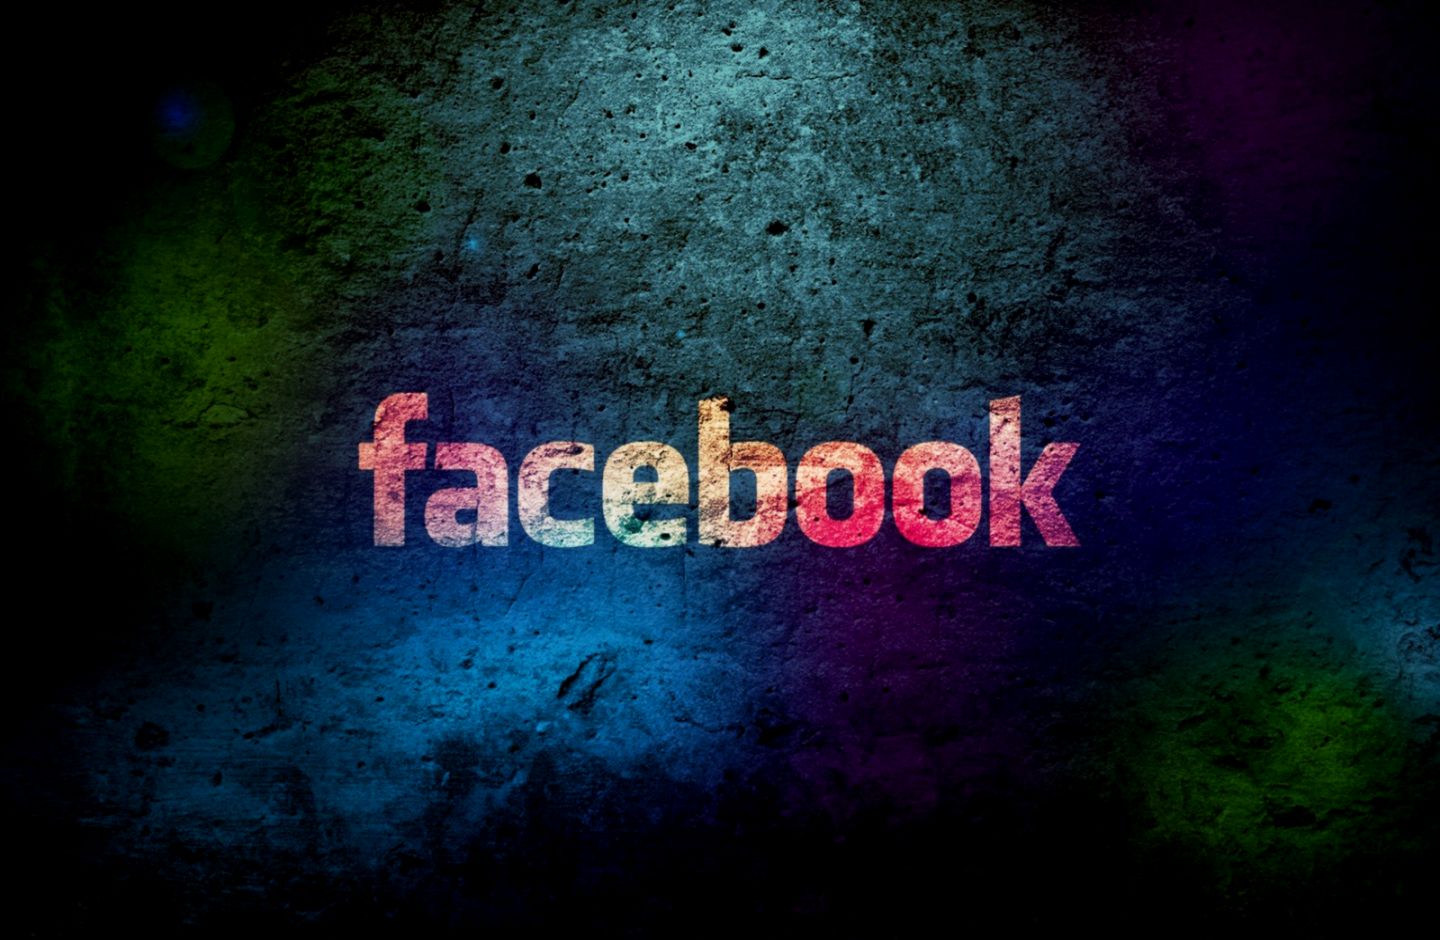 Facebook Background Wallpapers Win10 Themes - Facebook Hd Image Size -  1440x940 Wallpaper 